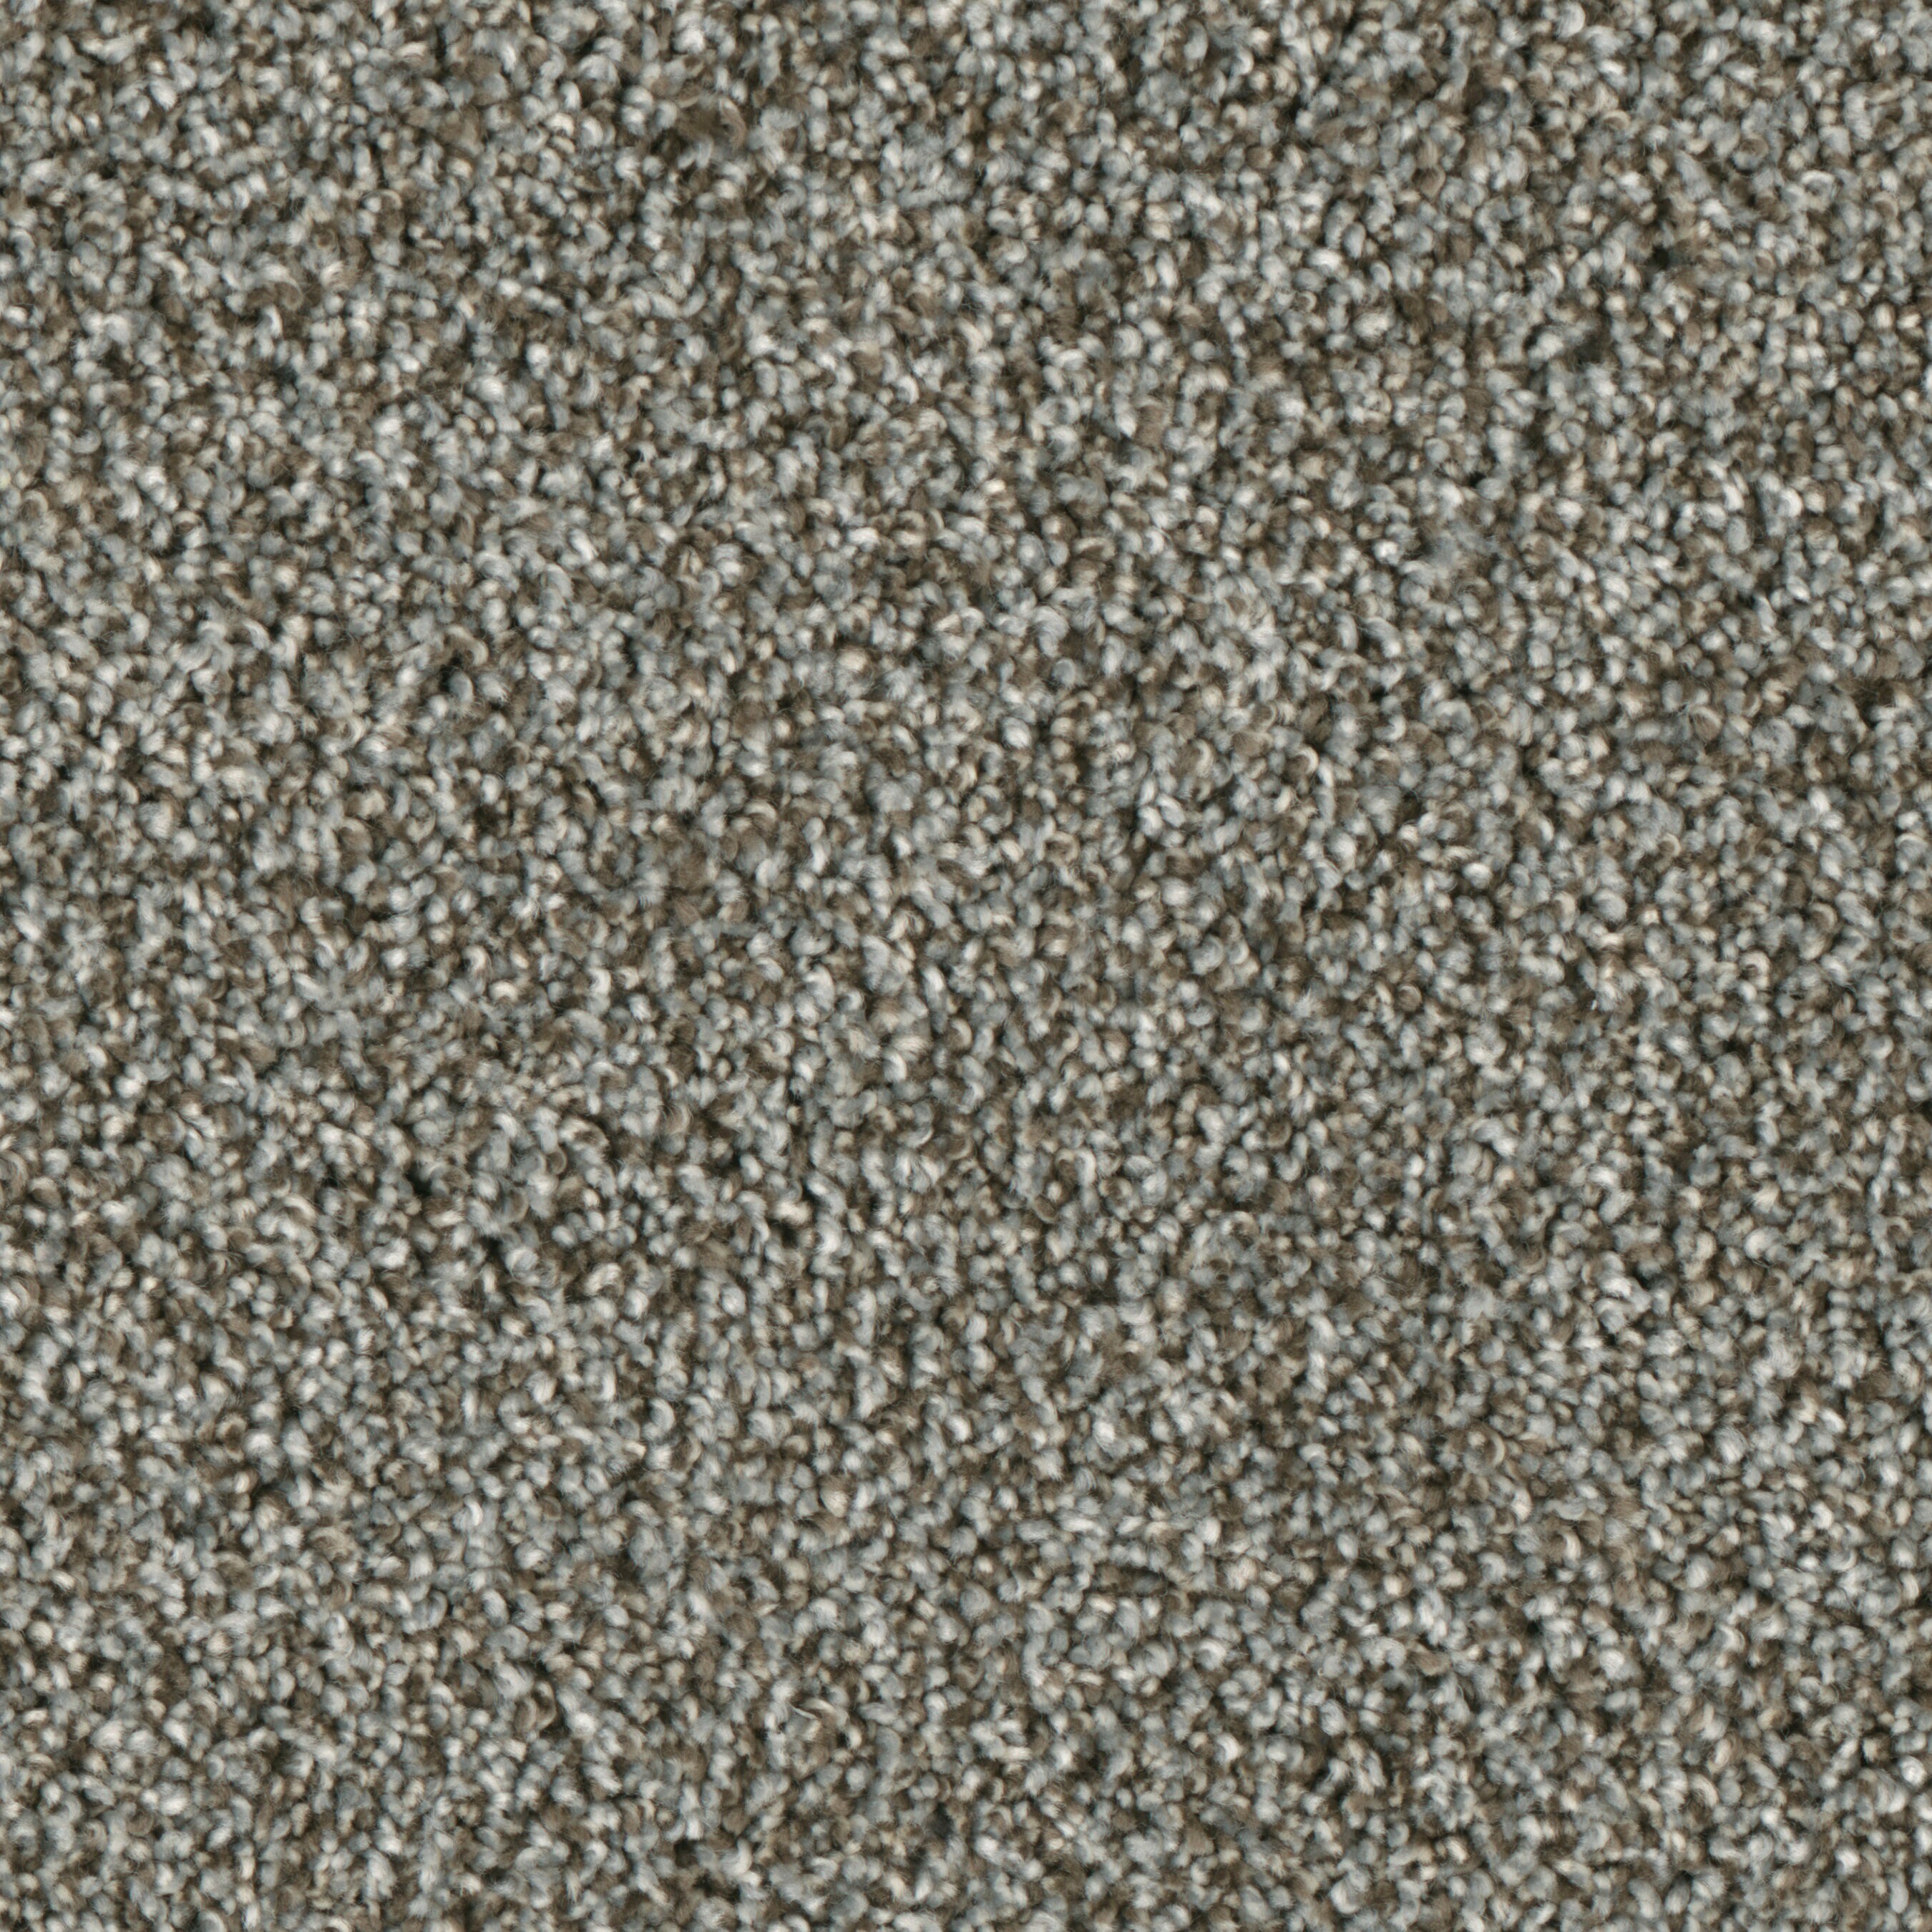 (Sample) Lenox Park Brookhaven Textured Indoor Carpet | - STAINMASTER S9255-936-S